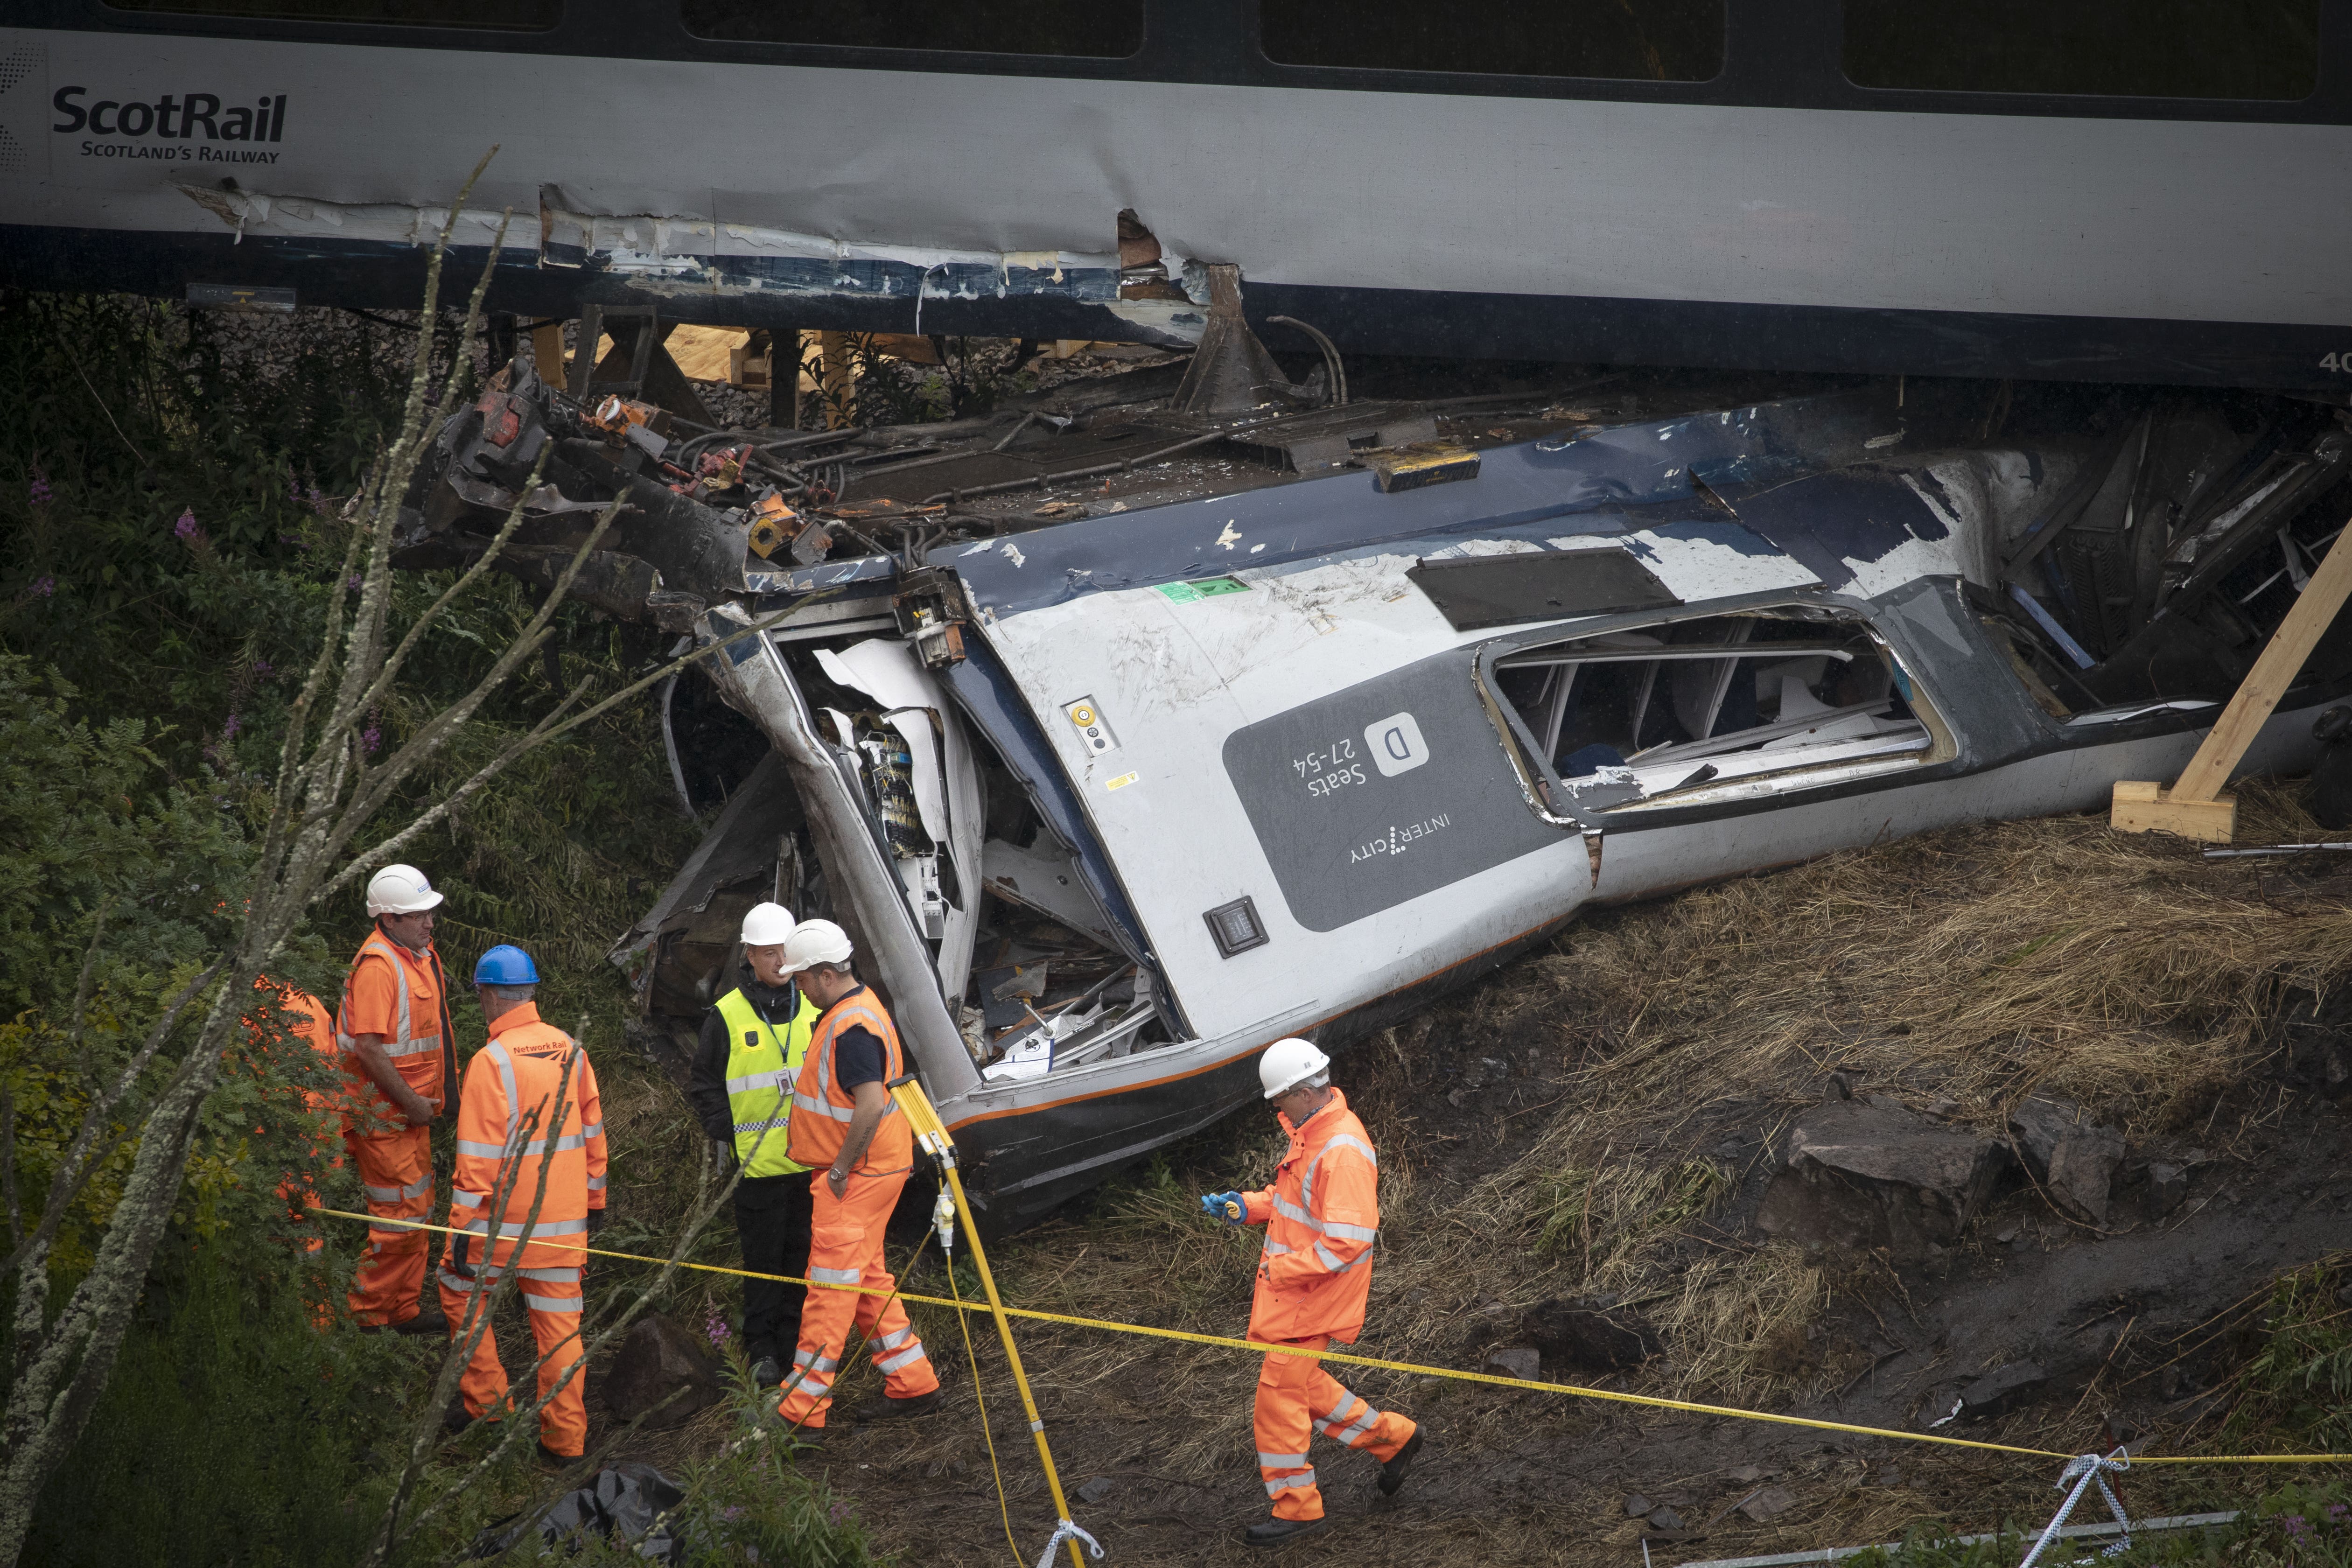 A woman has told how she was hurled out of a window of the train in the Stonehaven derailment (PA)